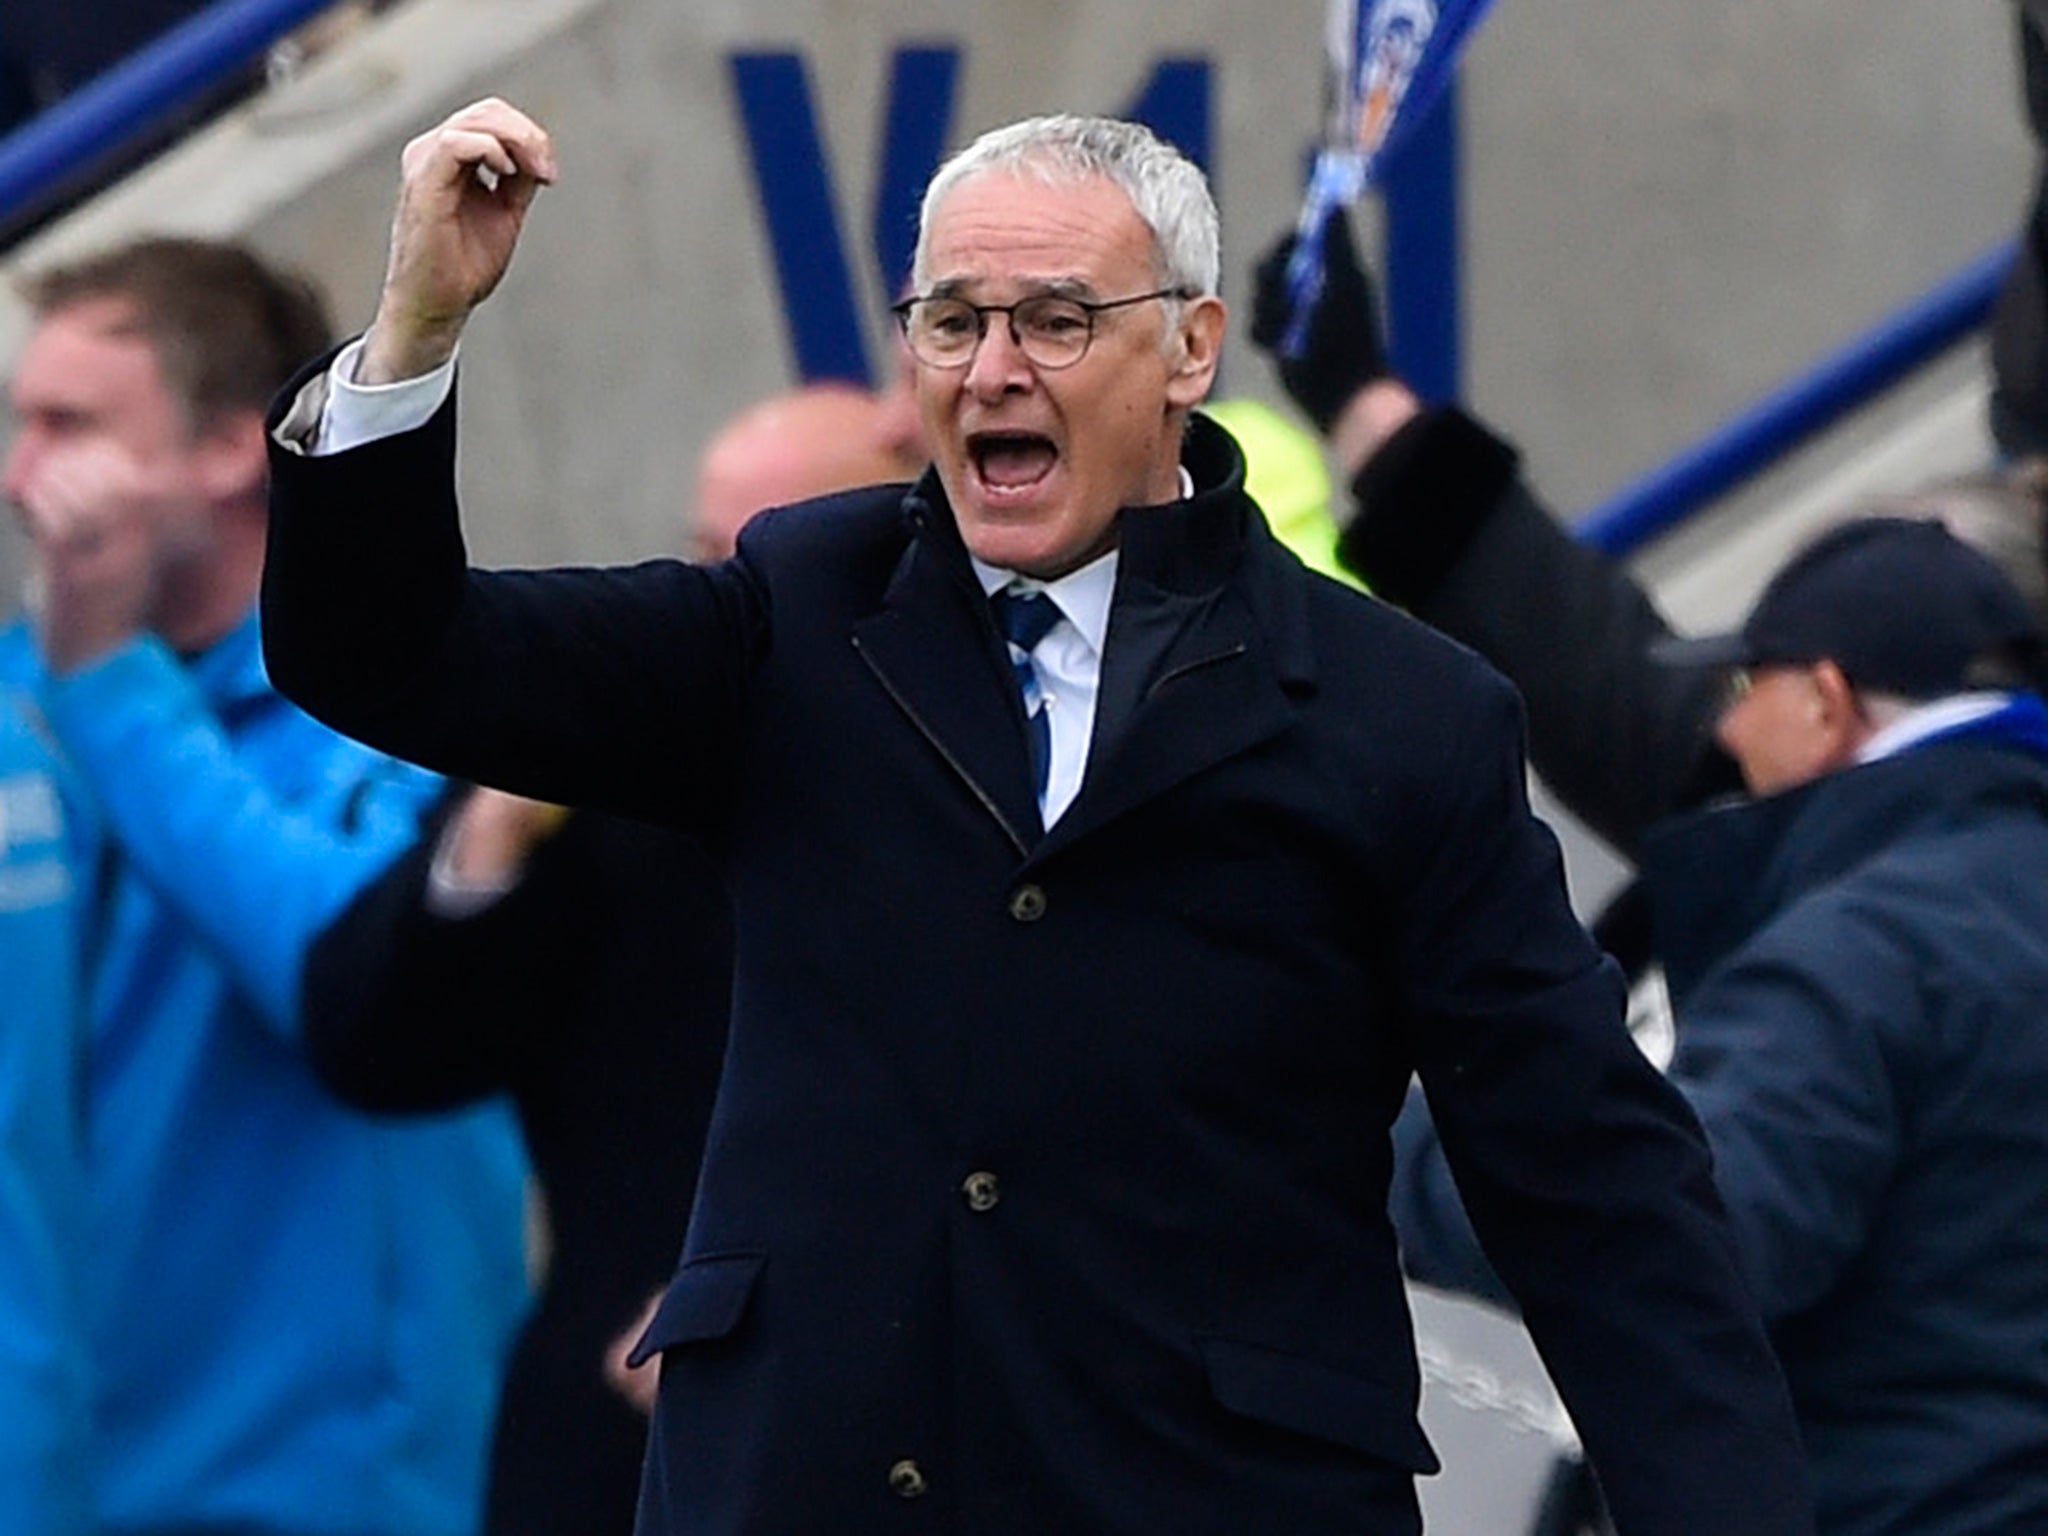 Ranieri has won the hearts of Leicester supporters